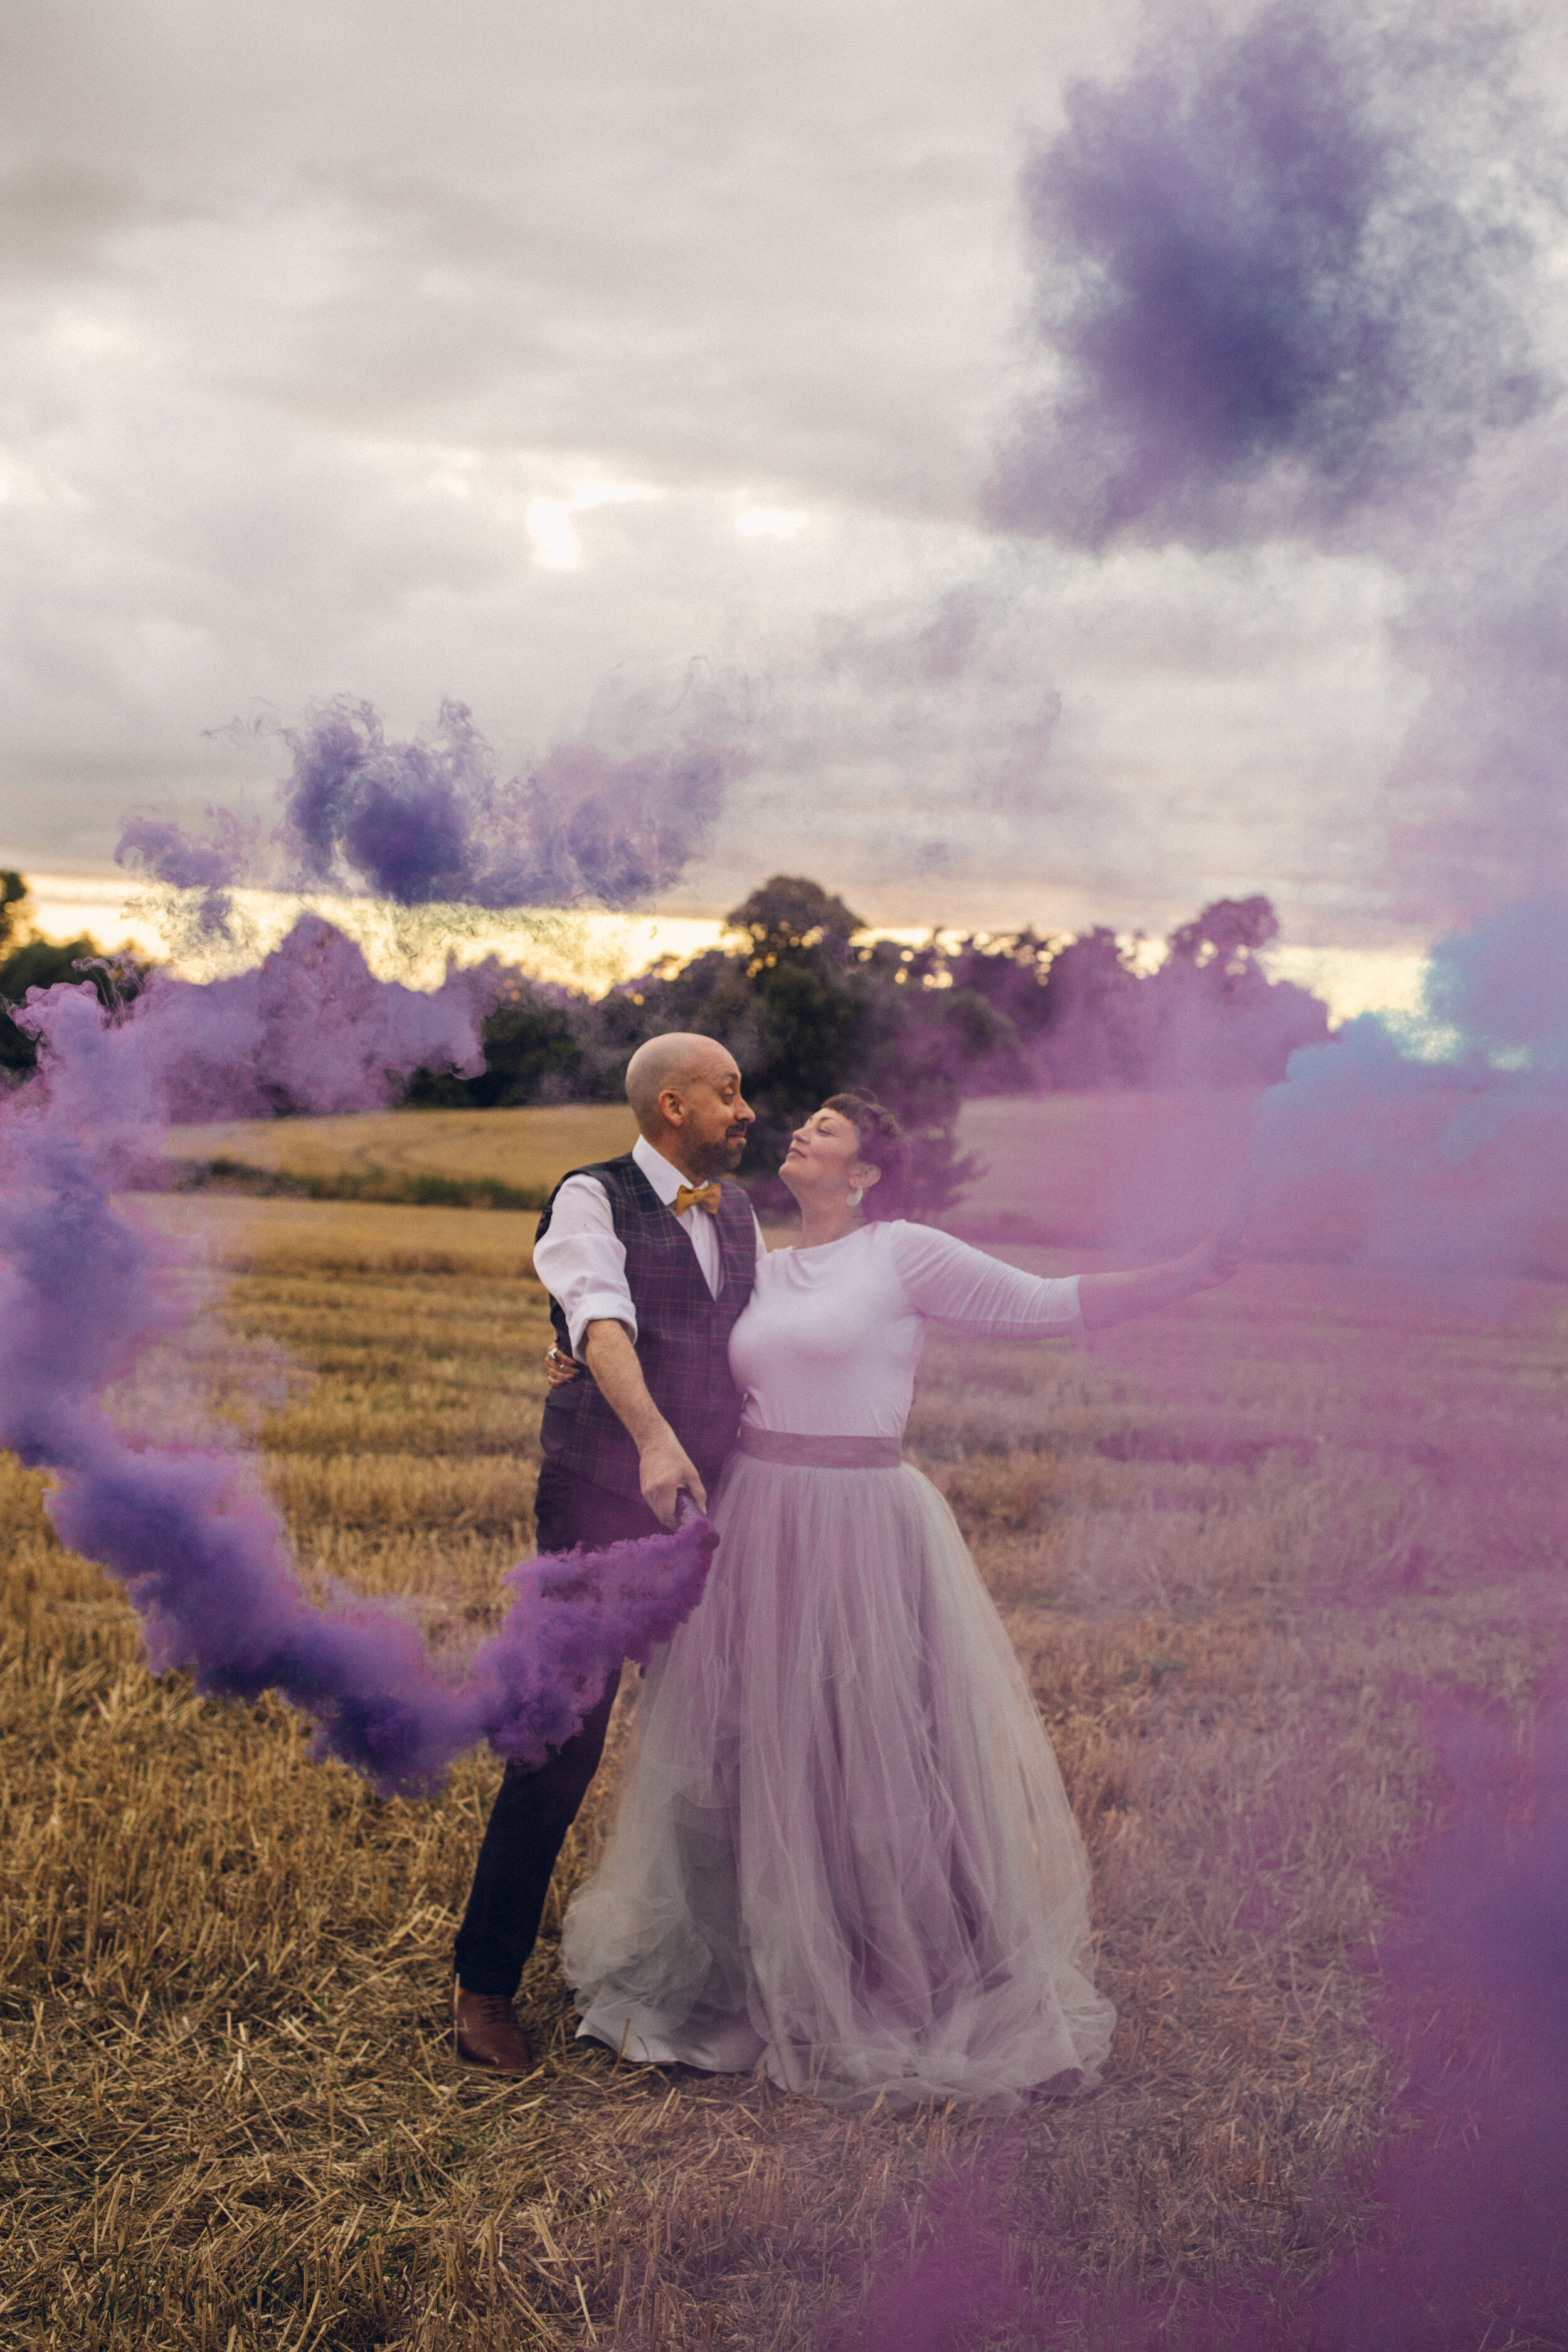 Colourful Wedding Photography with Smokebombs